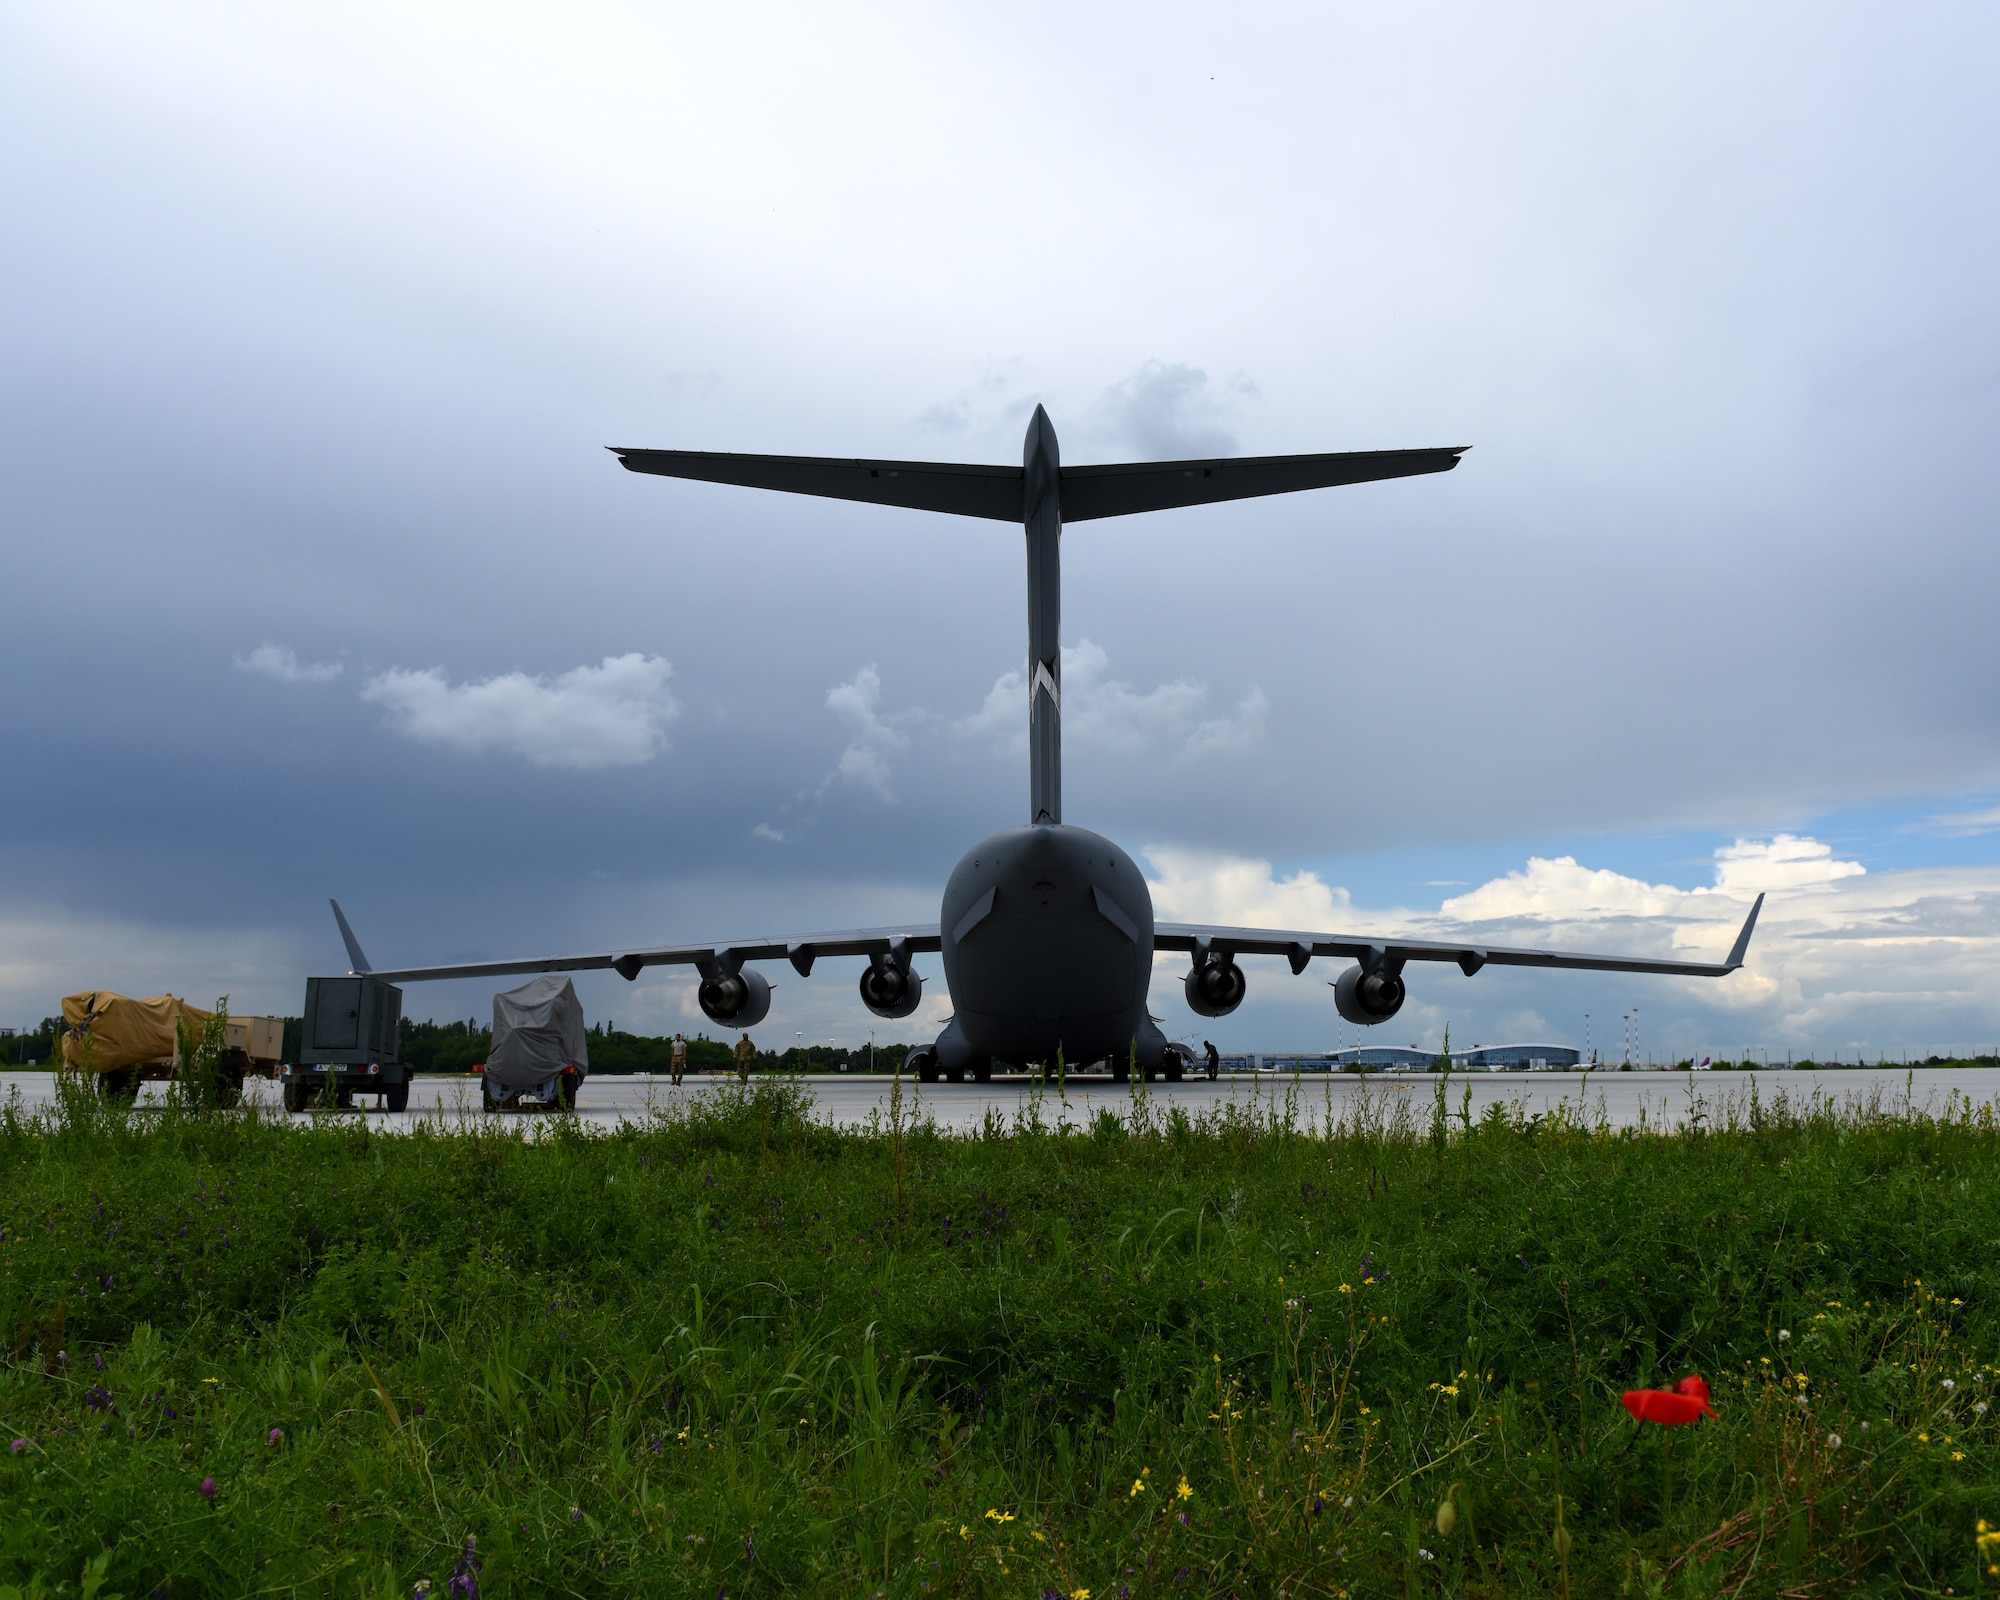 A C-17 Globemaster III from the 60th Air Mobility Wing is parked near the flightline at the Henri Coanda International Airport May 25, 2019, in Bucharest, Romania. U.S. Air Force personnel worked with members of the Romanian armed forces to load the C-17 with cargo and equipment that would then be delivered to Afghanistan in support of NATO’s Resolute Support mission. Romania is the sixth largest contributor of troops to RS with more than 730 personnel deployed. (U.S. Air Force photo by 2nd Lt. R. Michael Longoria)